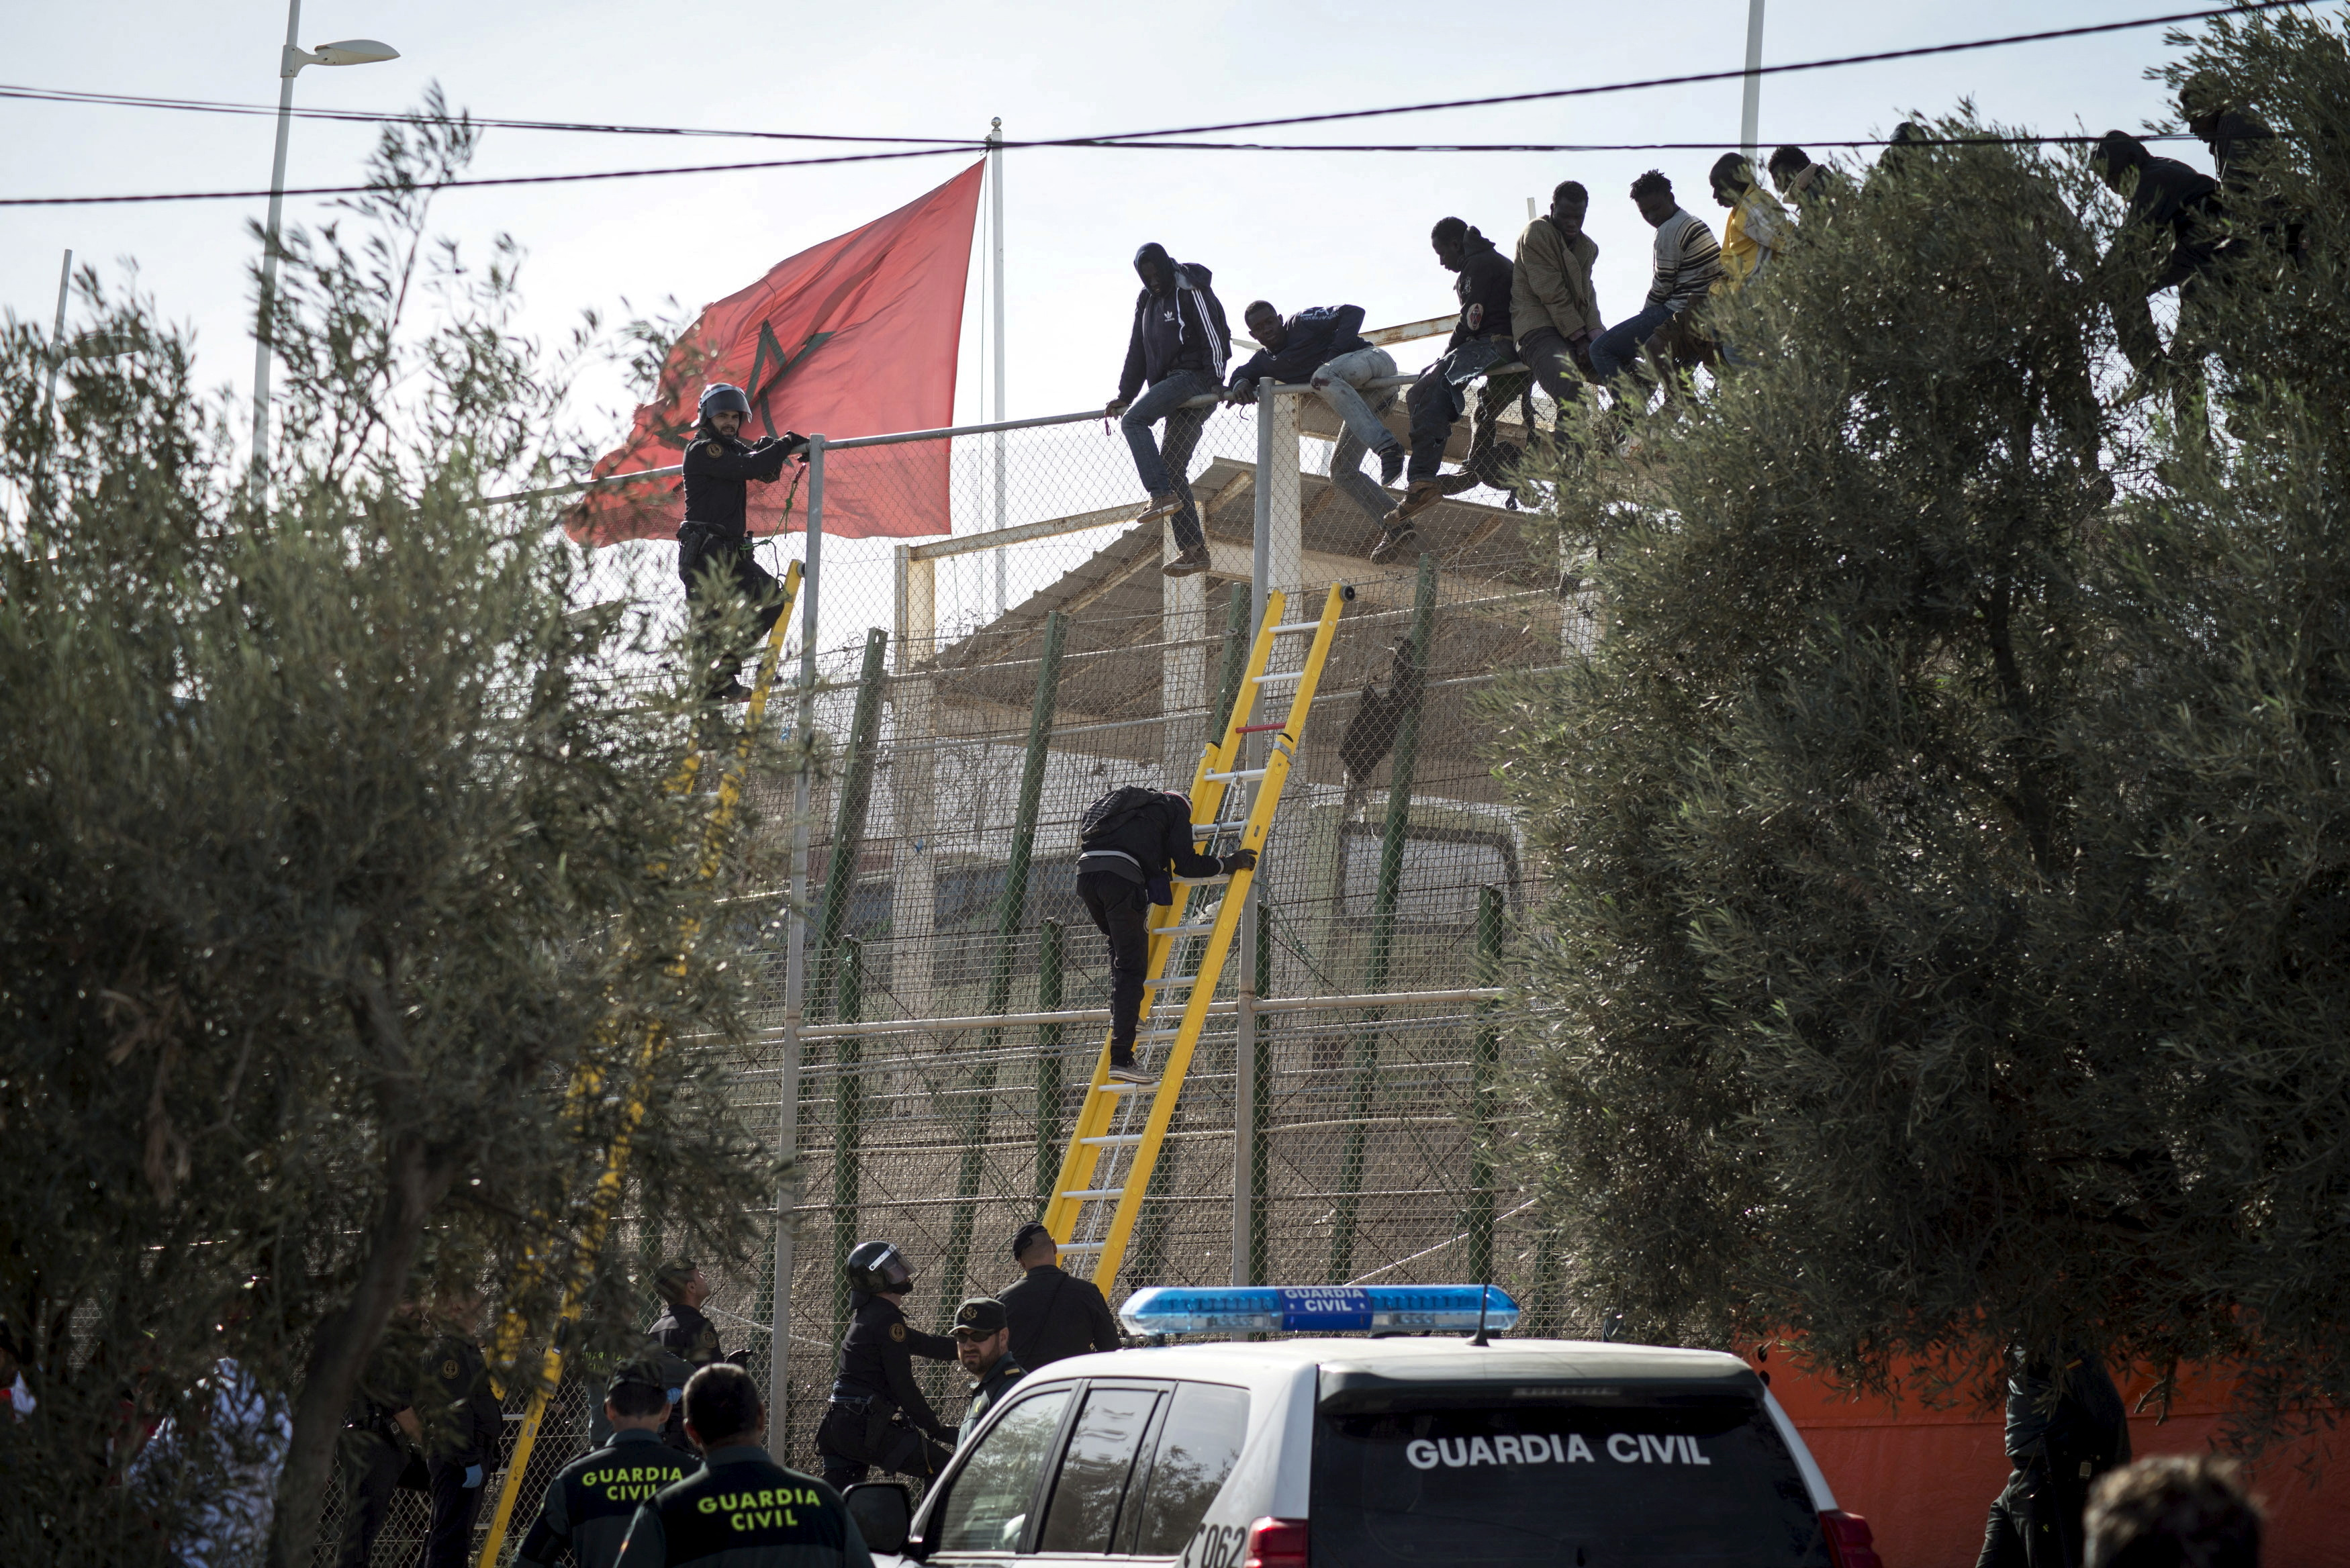 African migrants sit on top of a border fence during an attempt to cross into Spanish territories, between Morocco and Spain's north African enclave of Melilla